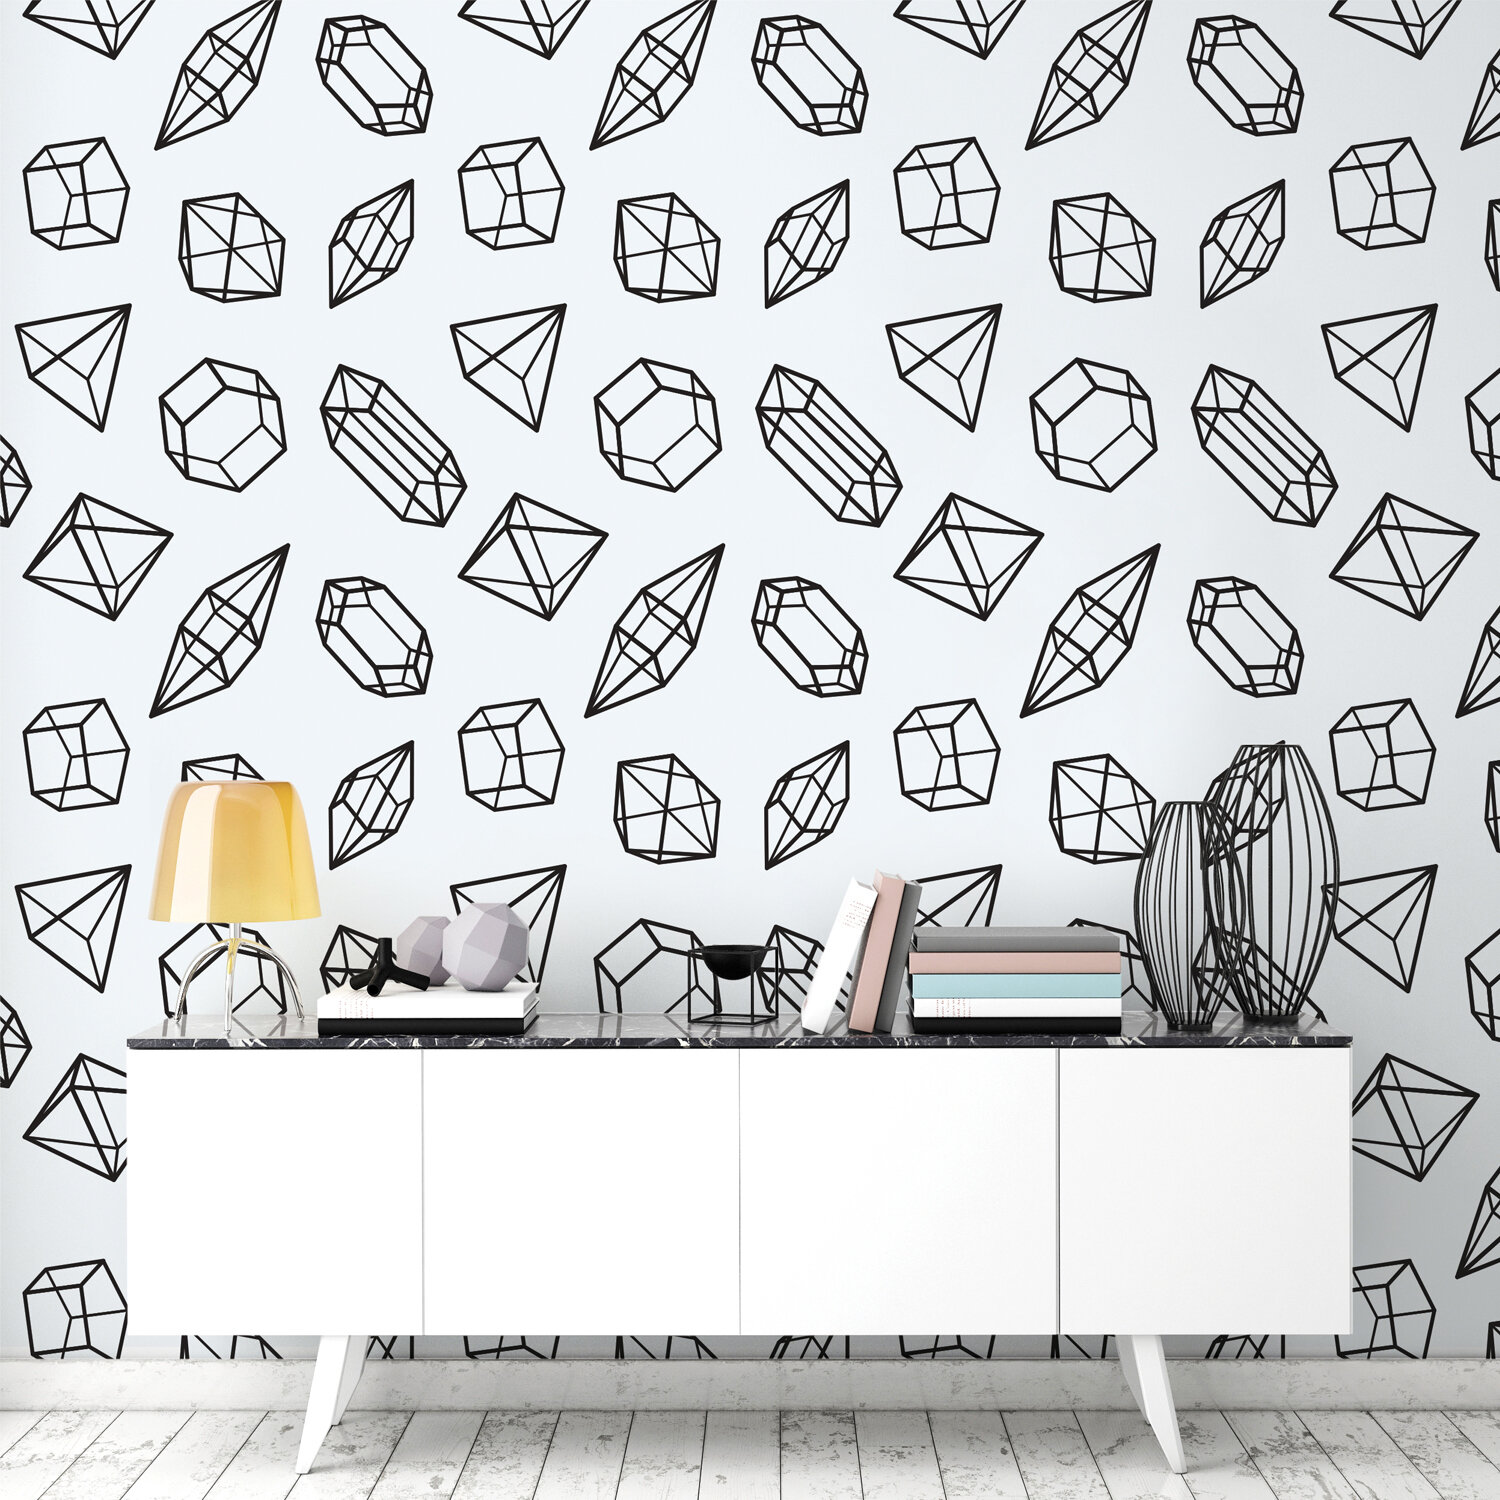  Composite image of Wallcandy Arts’ vinyl wallpaper and stock image using Photoshop and Illustrator 